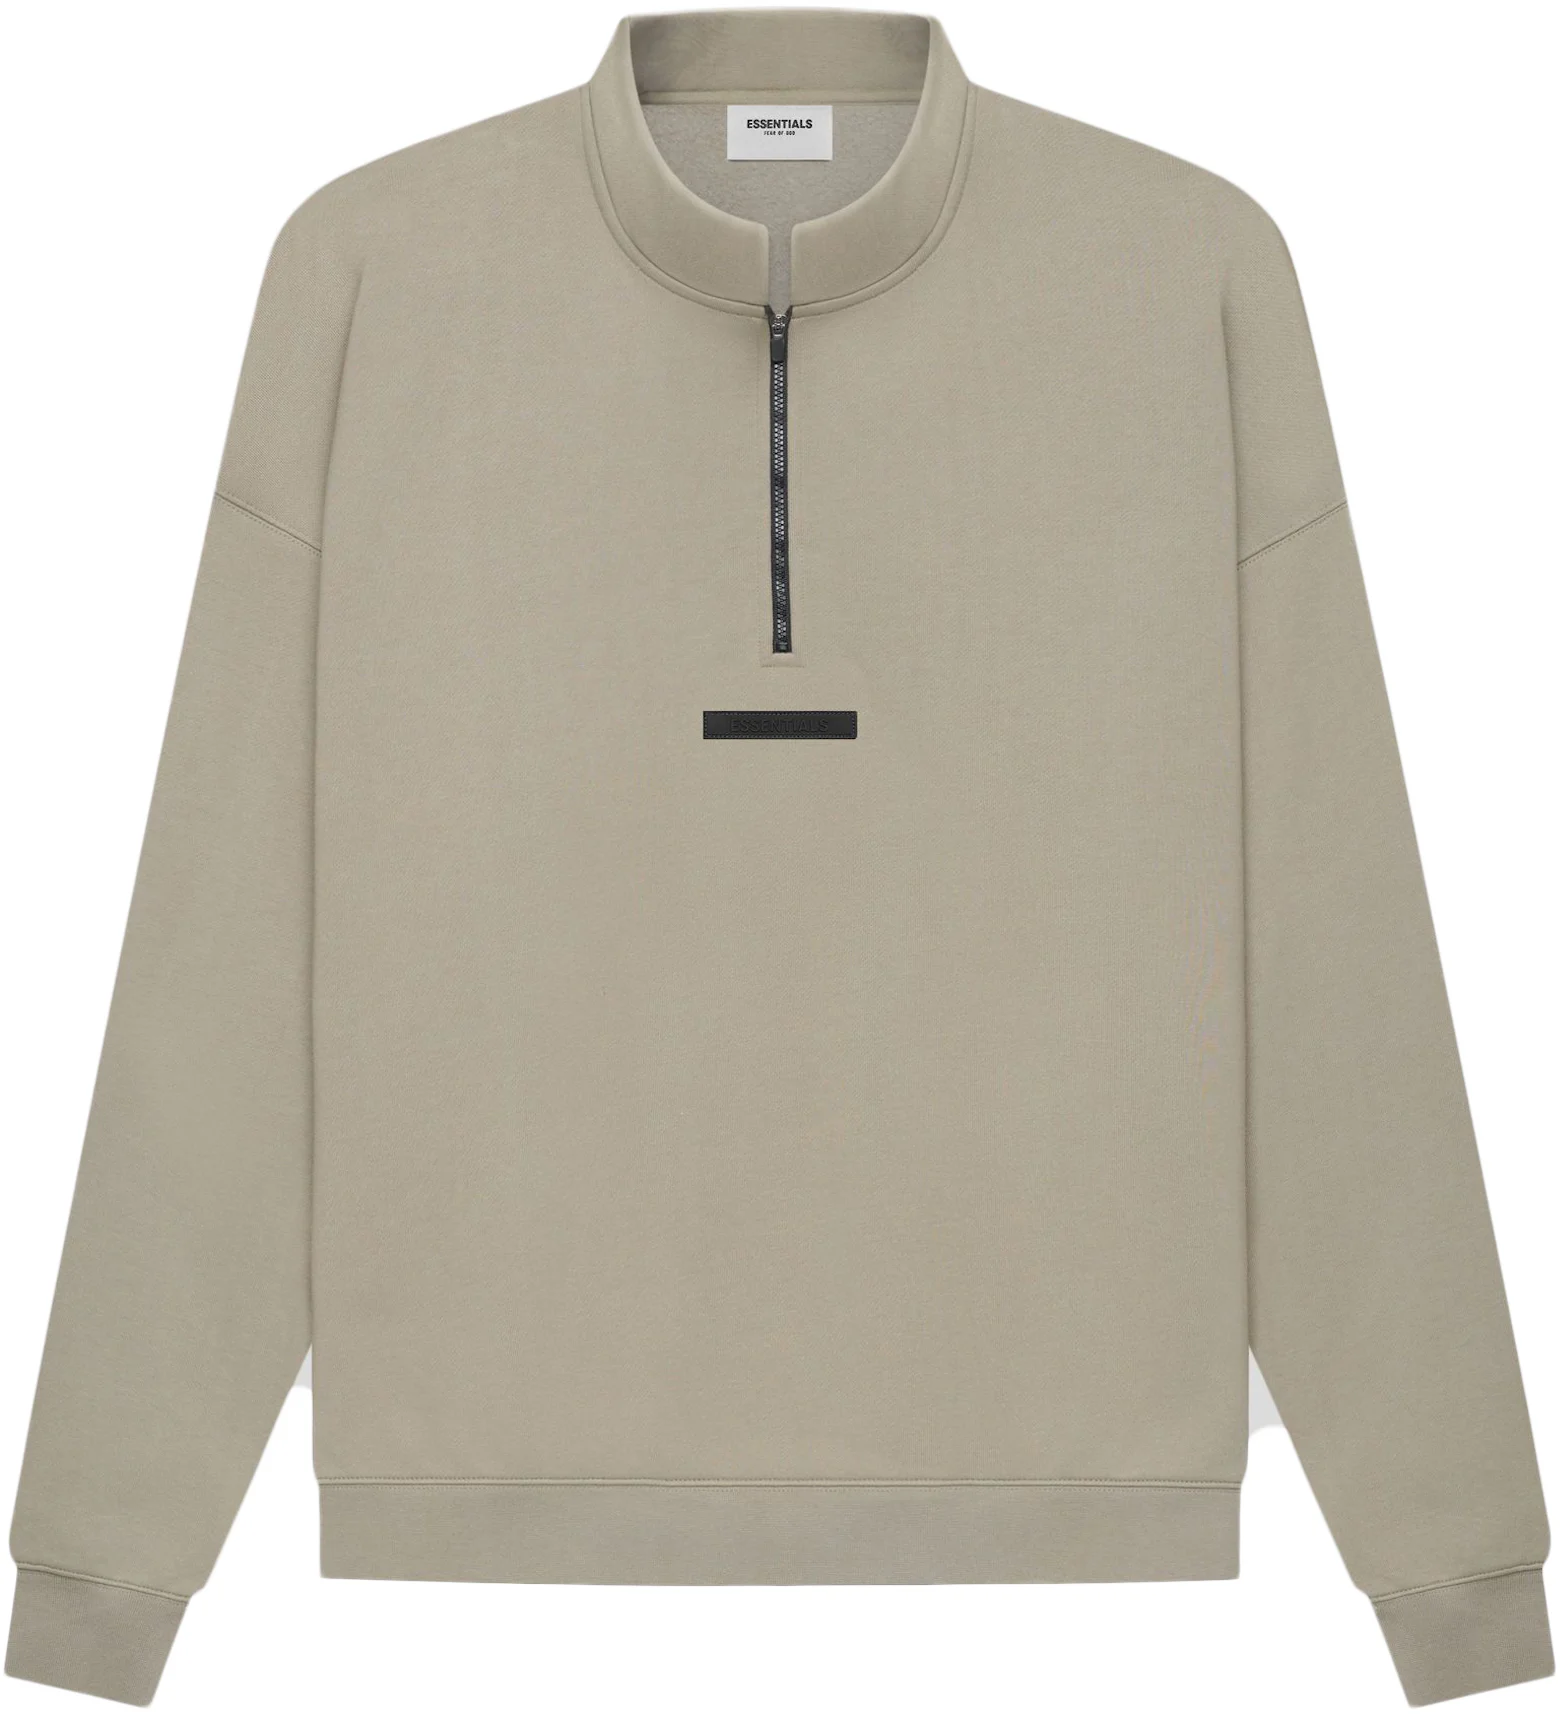 Green Knit Zip-Up Sweater by Fear of God ESSENTIALS on Sale